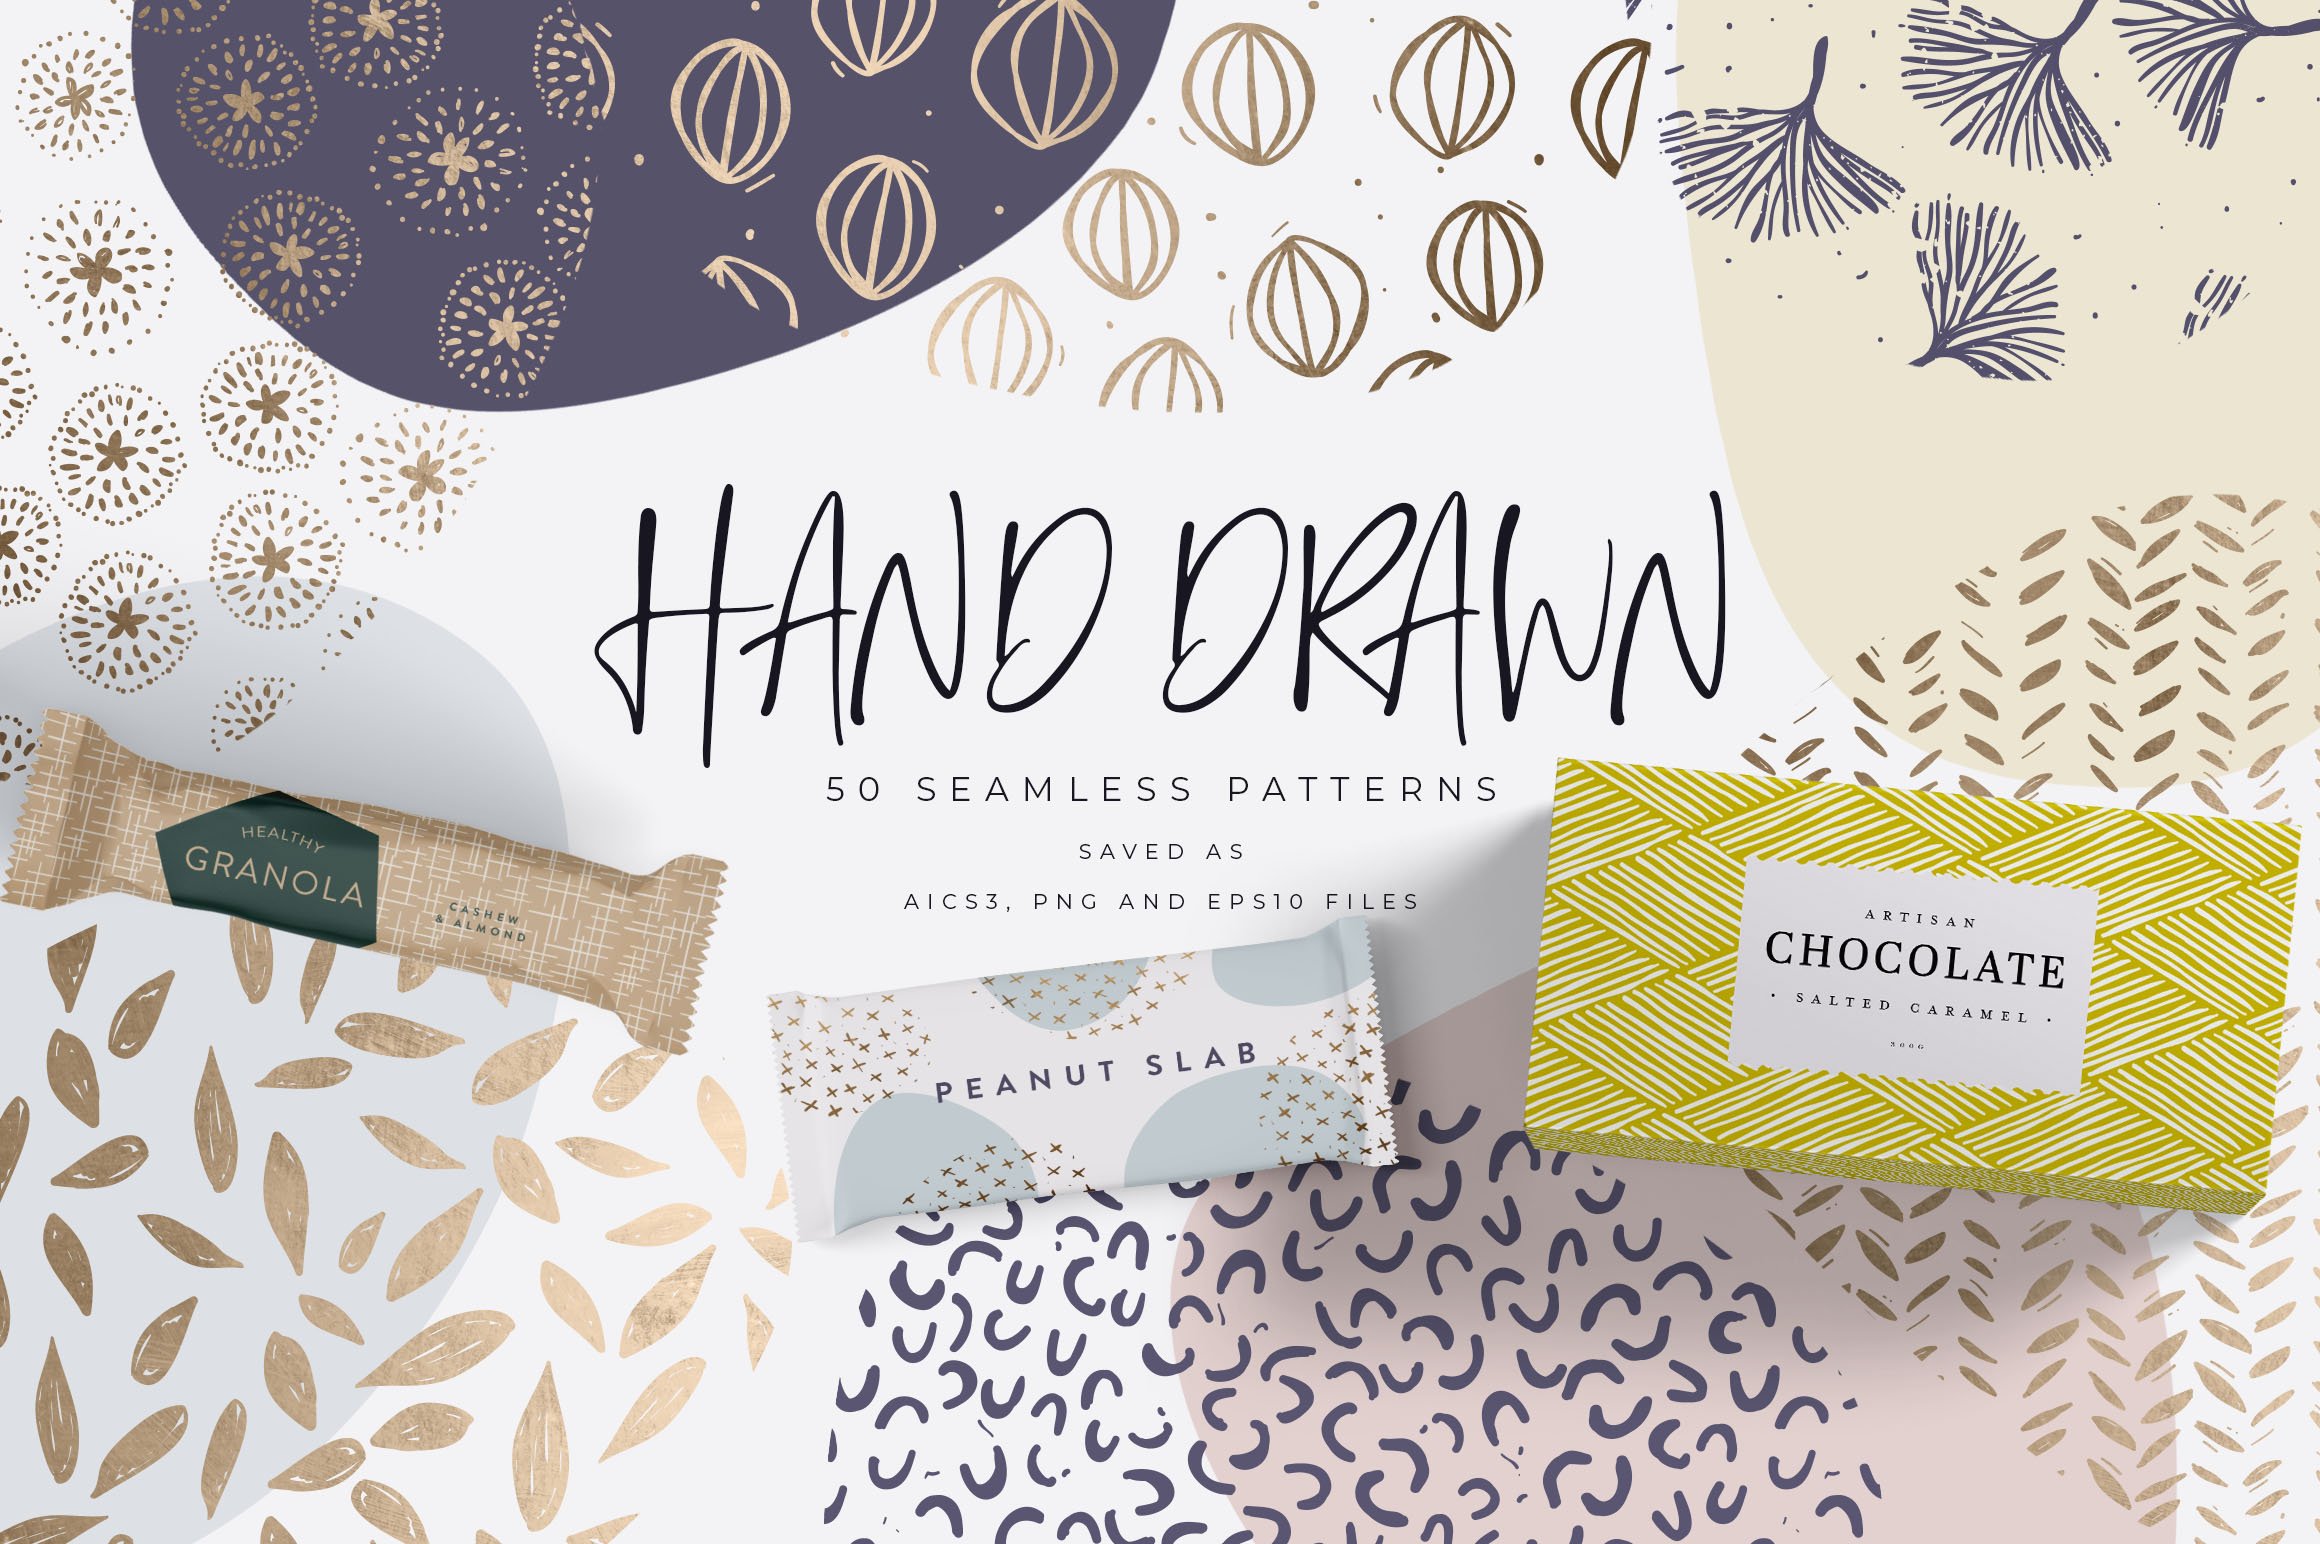 The Handpicked Artistic Design Collection